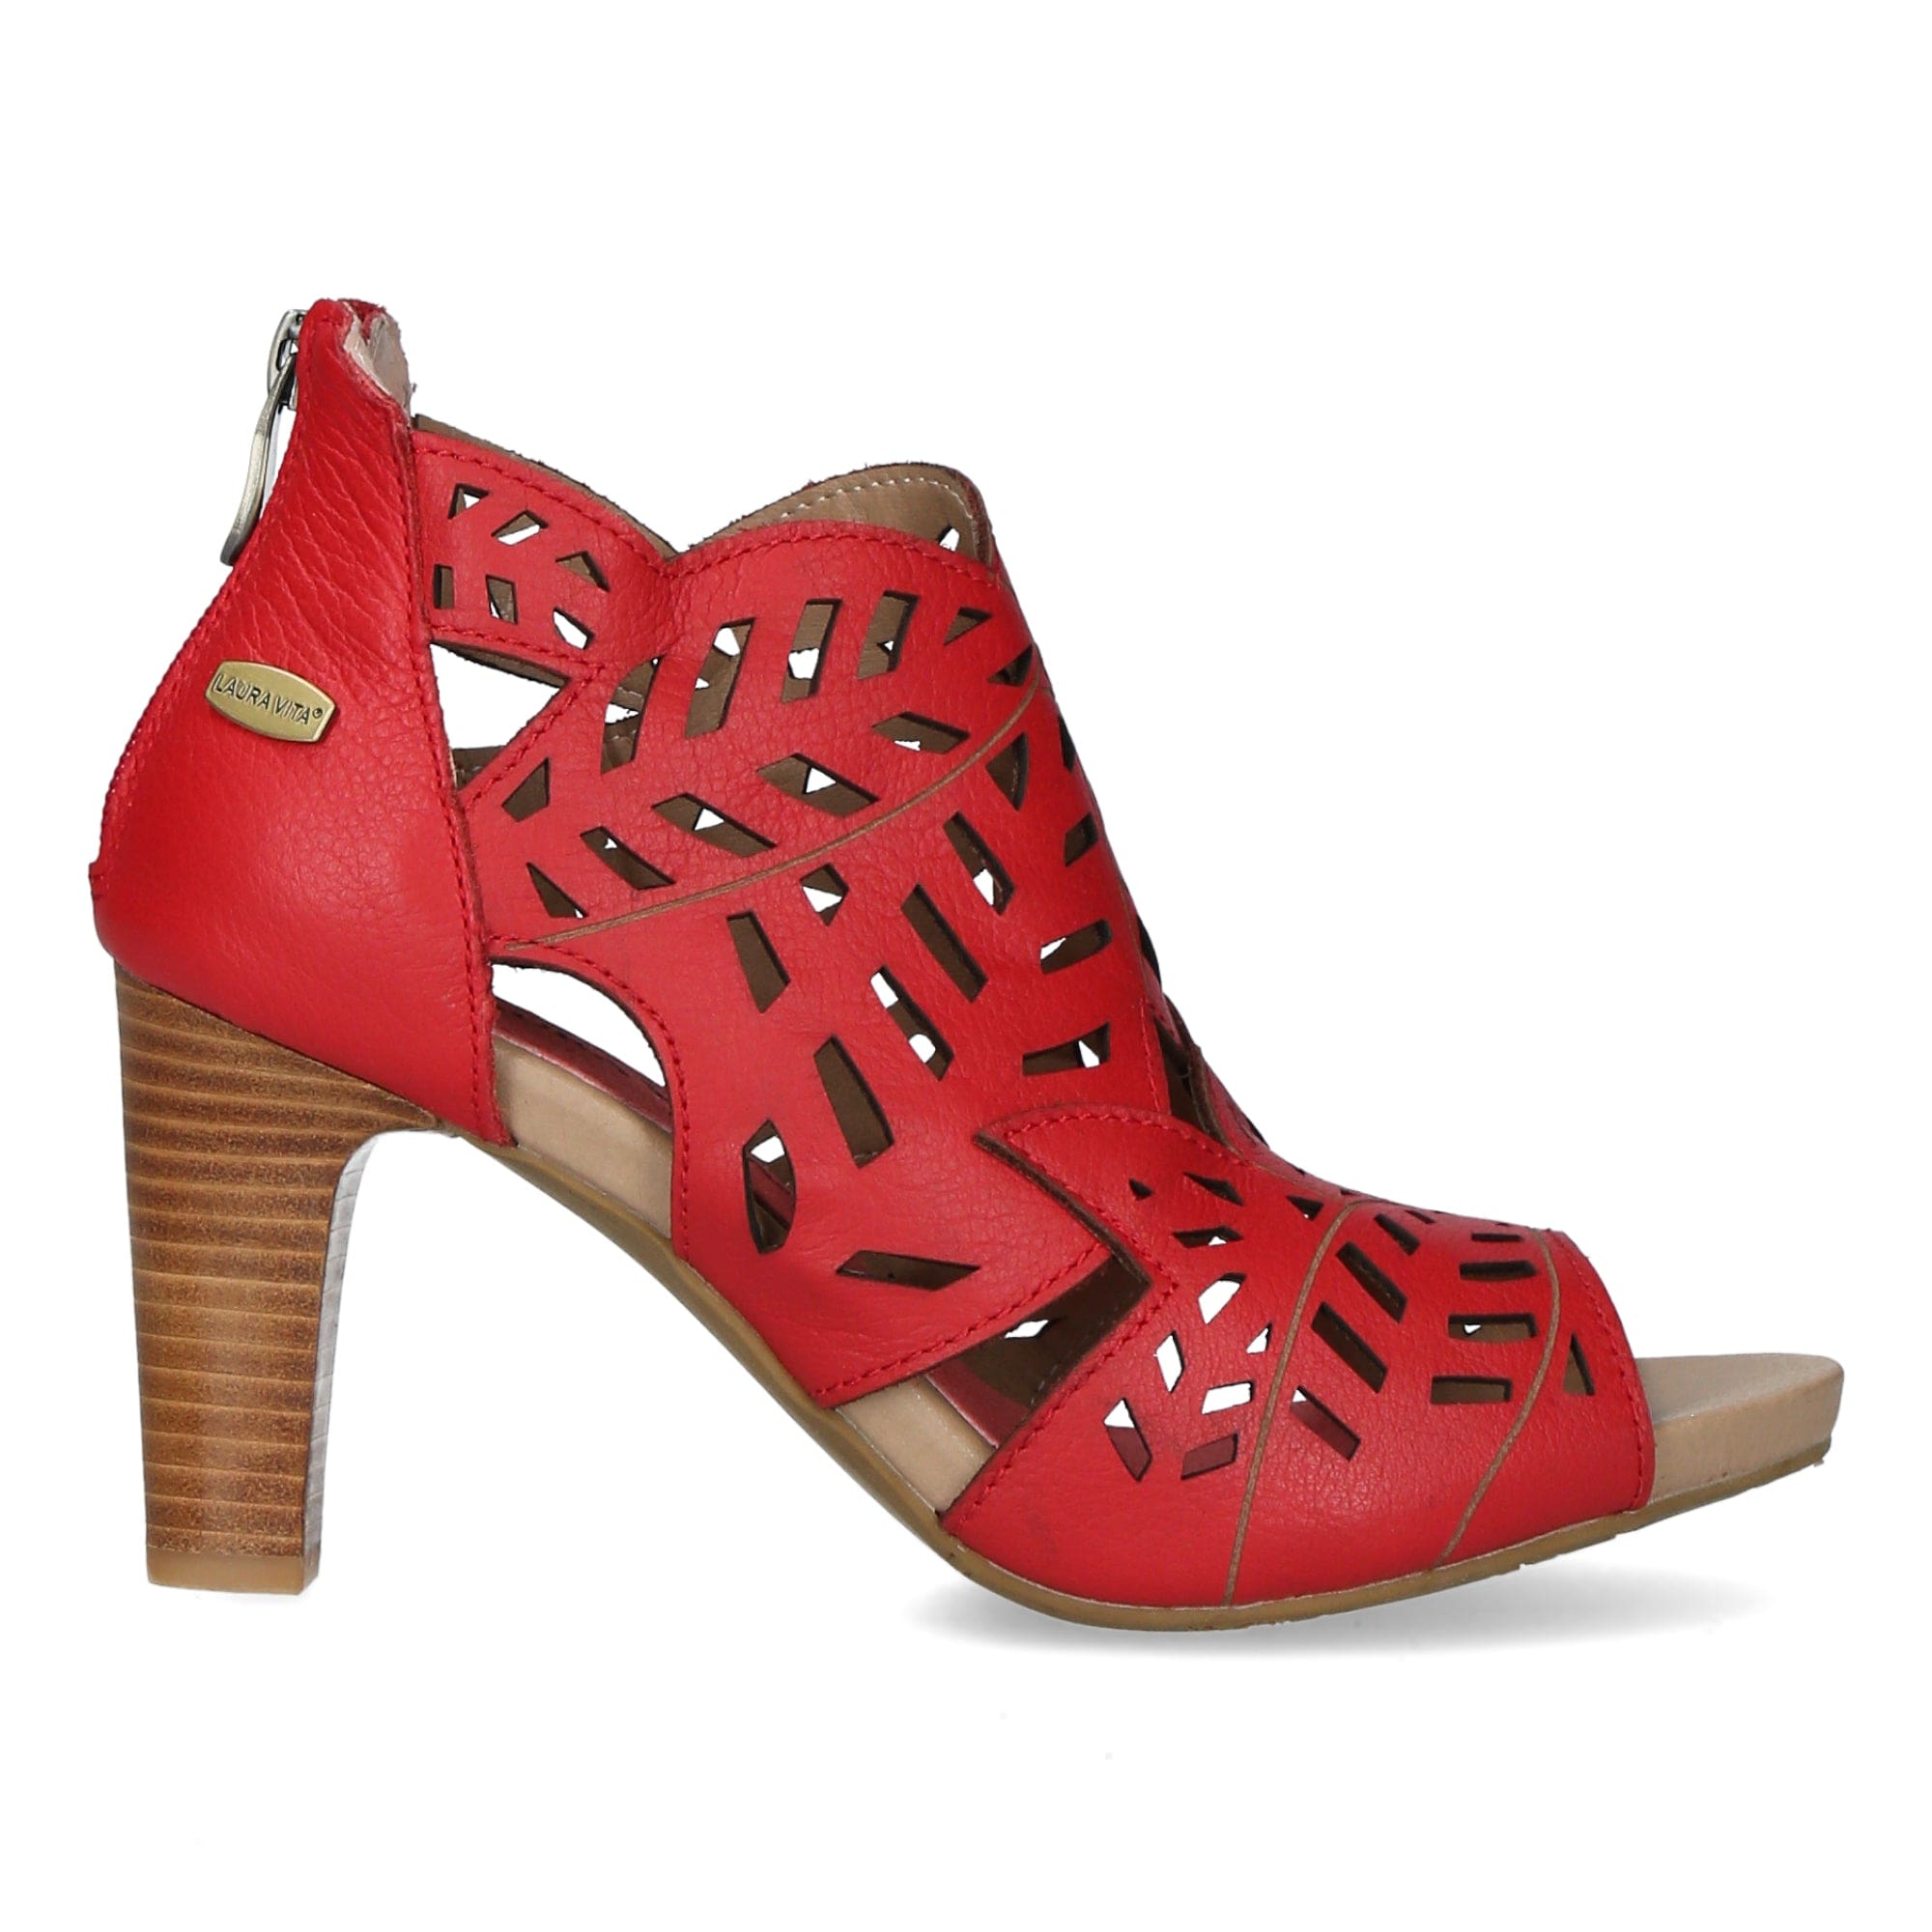 Chaussures ALBANE 048 - 35 / RED - Sandale